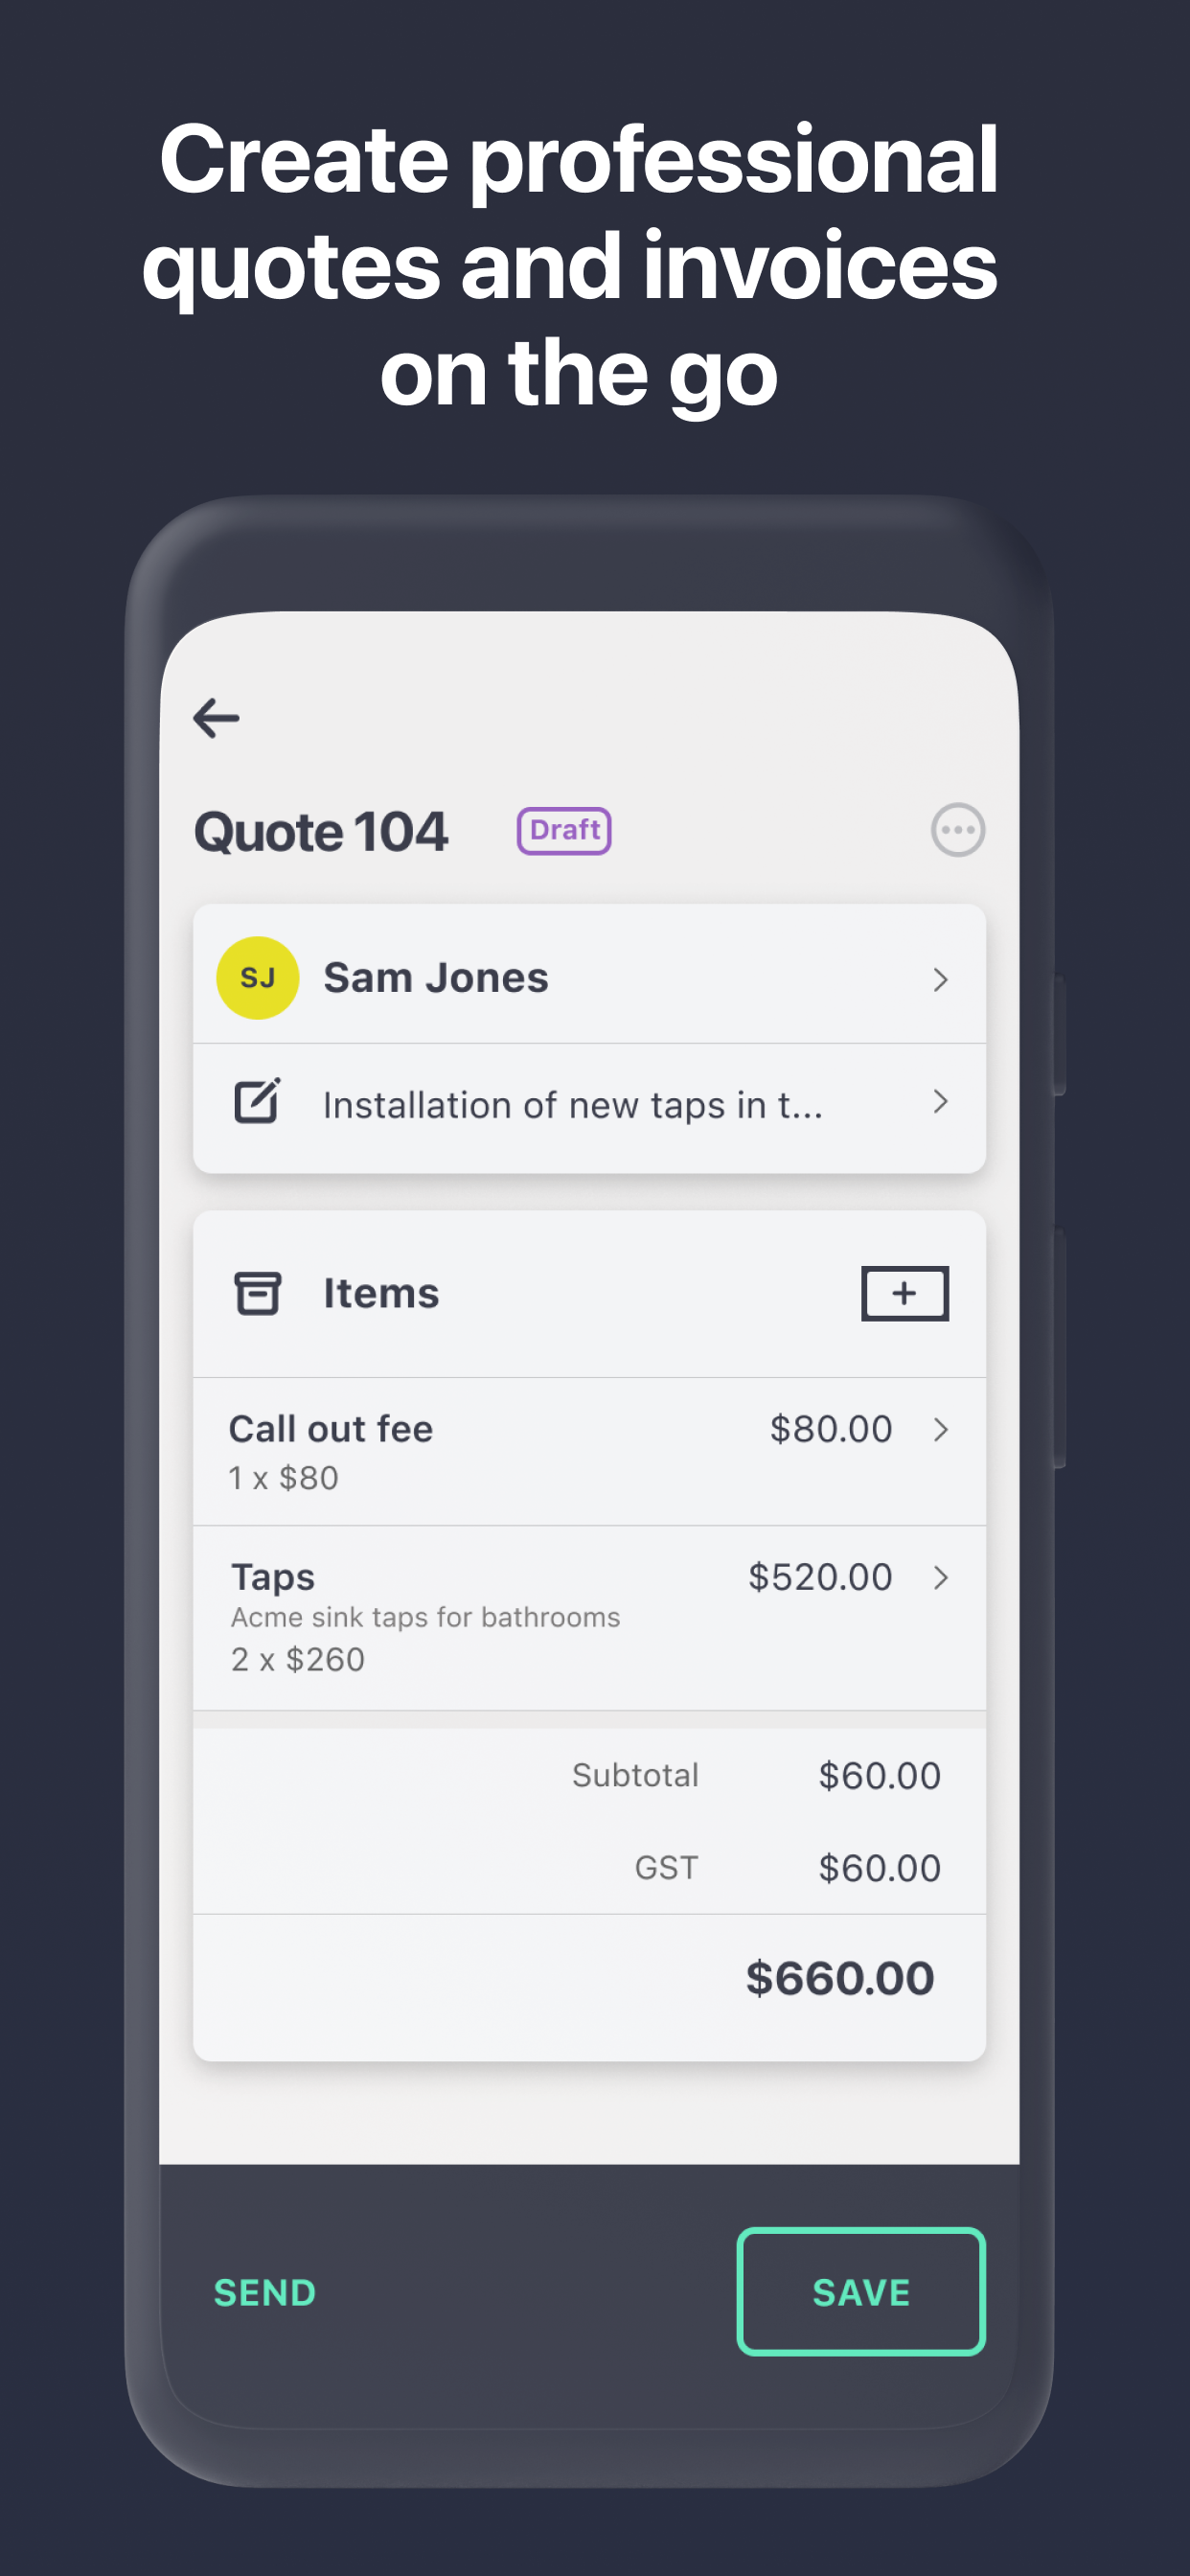 Create professional quotes and invoices on the go